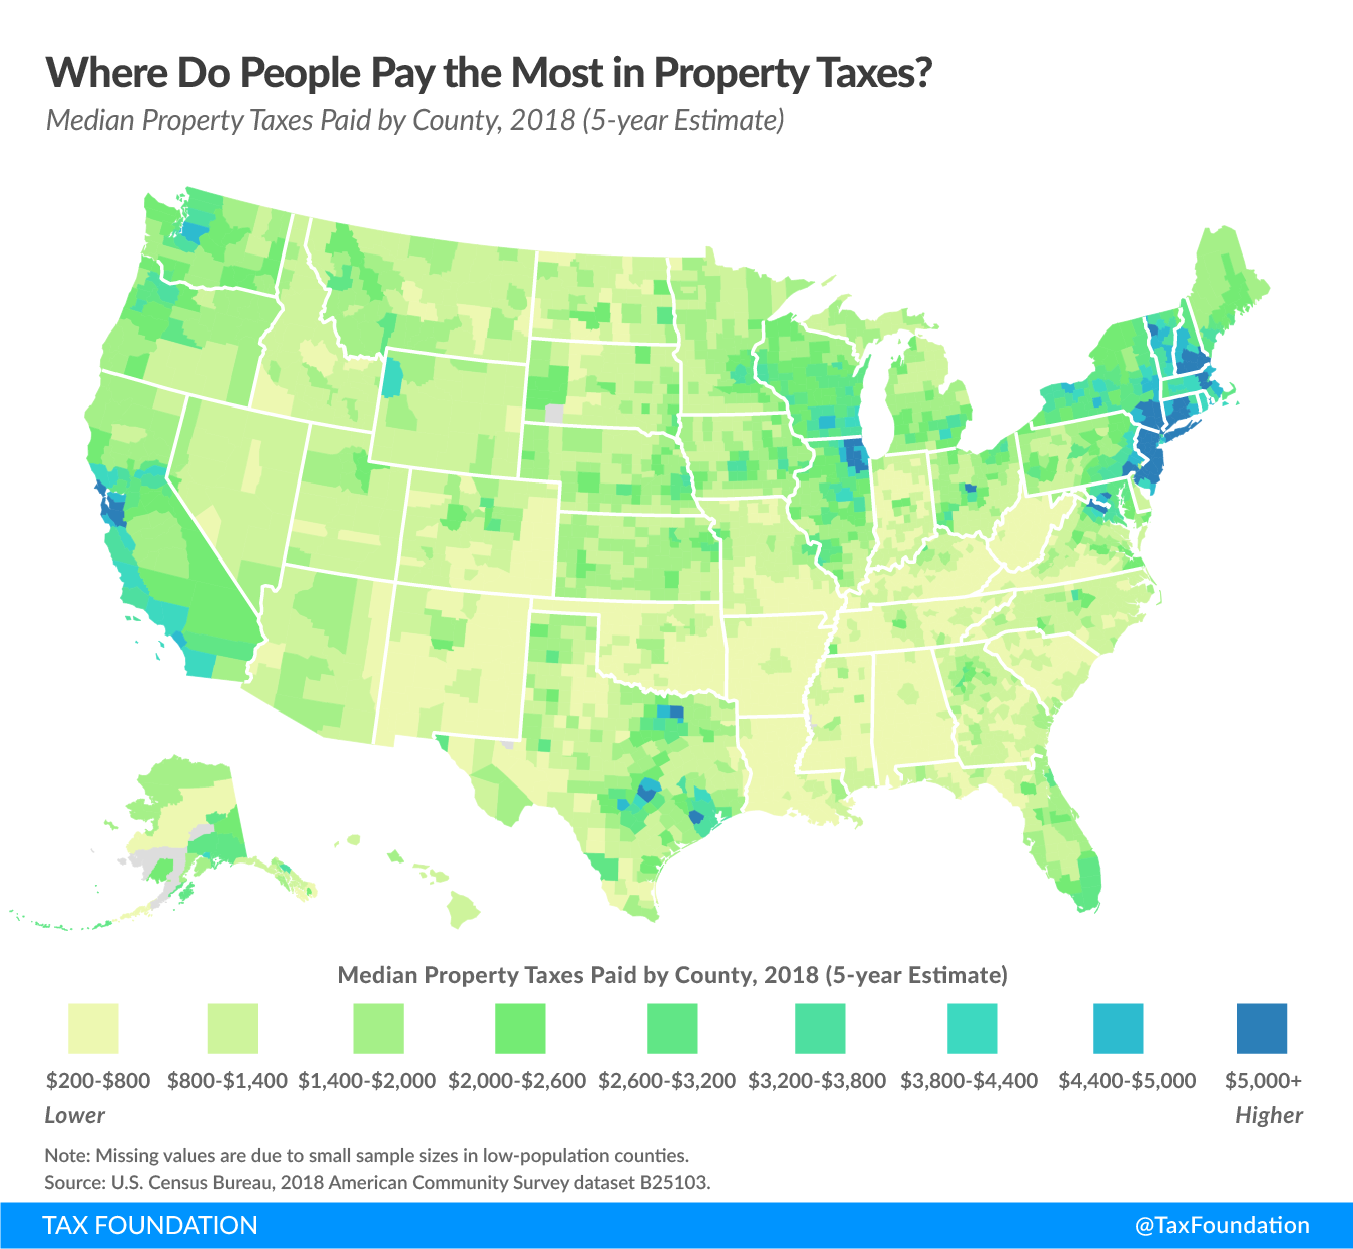 states with the higest property taxes, where do people pay the most in property taxes in the united states